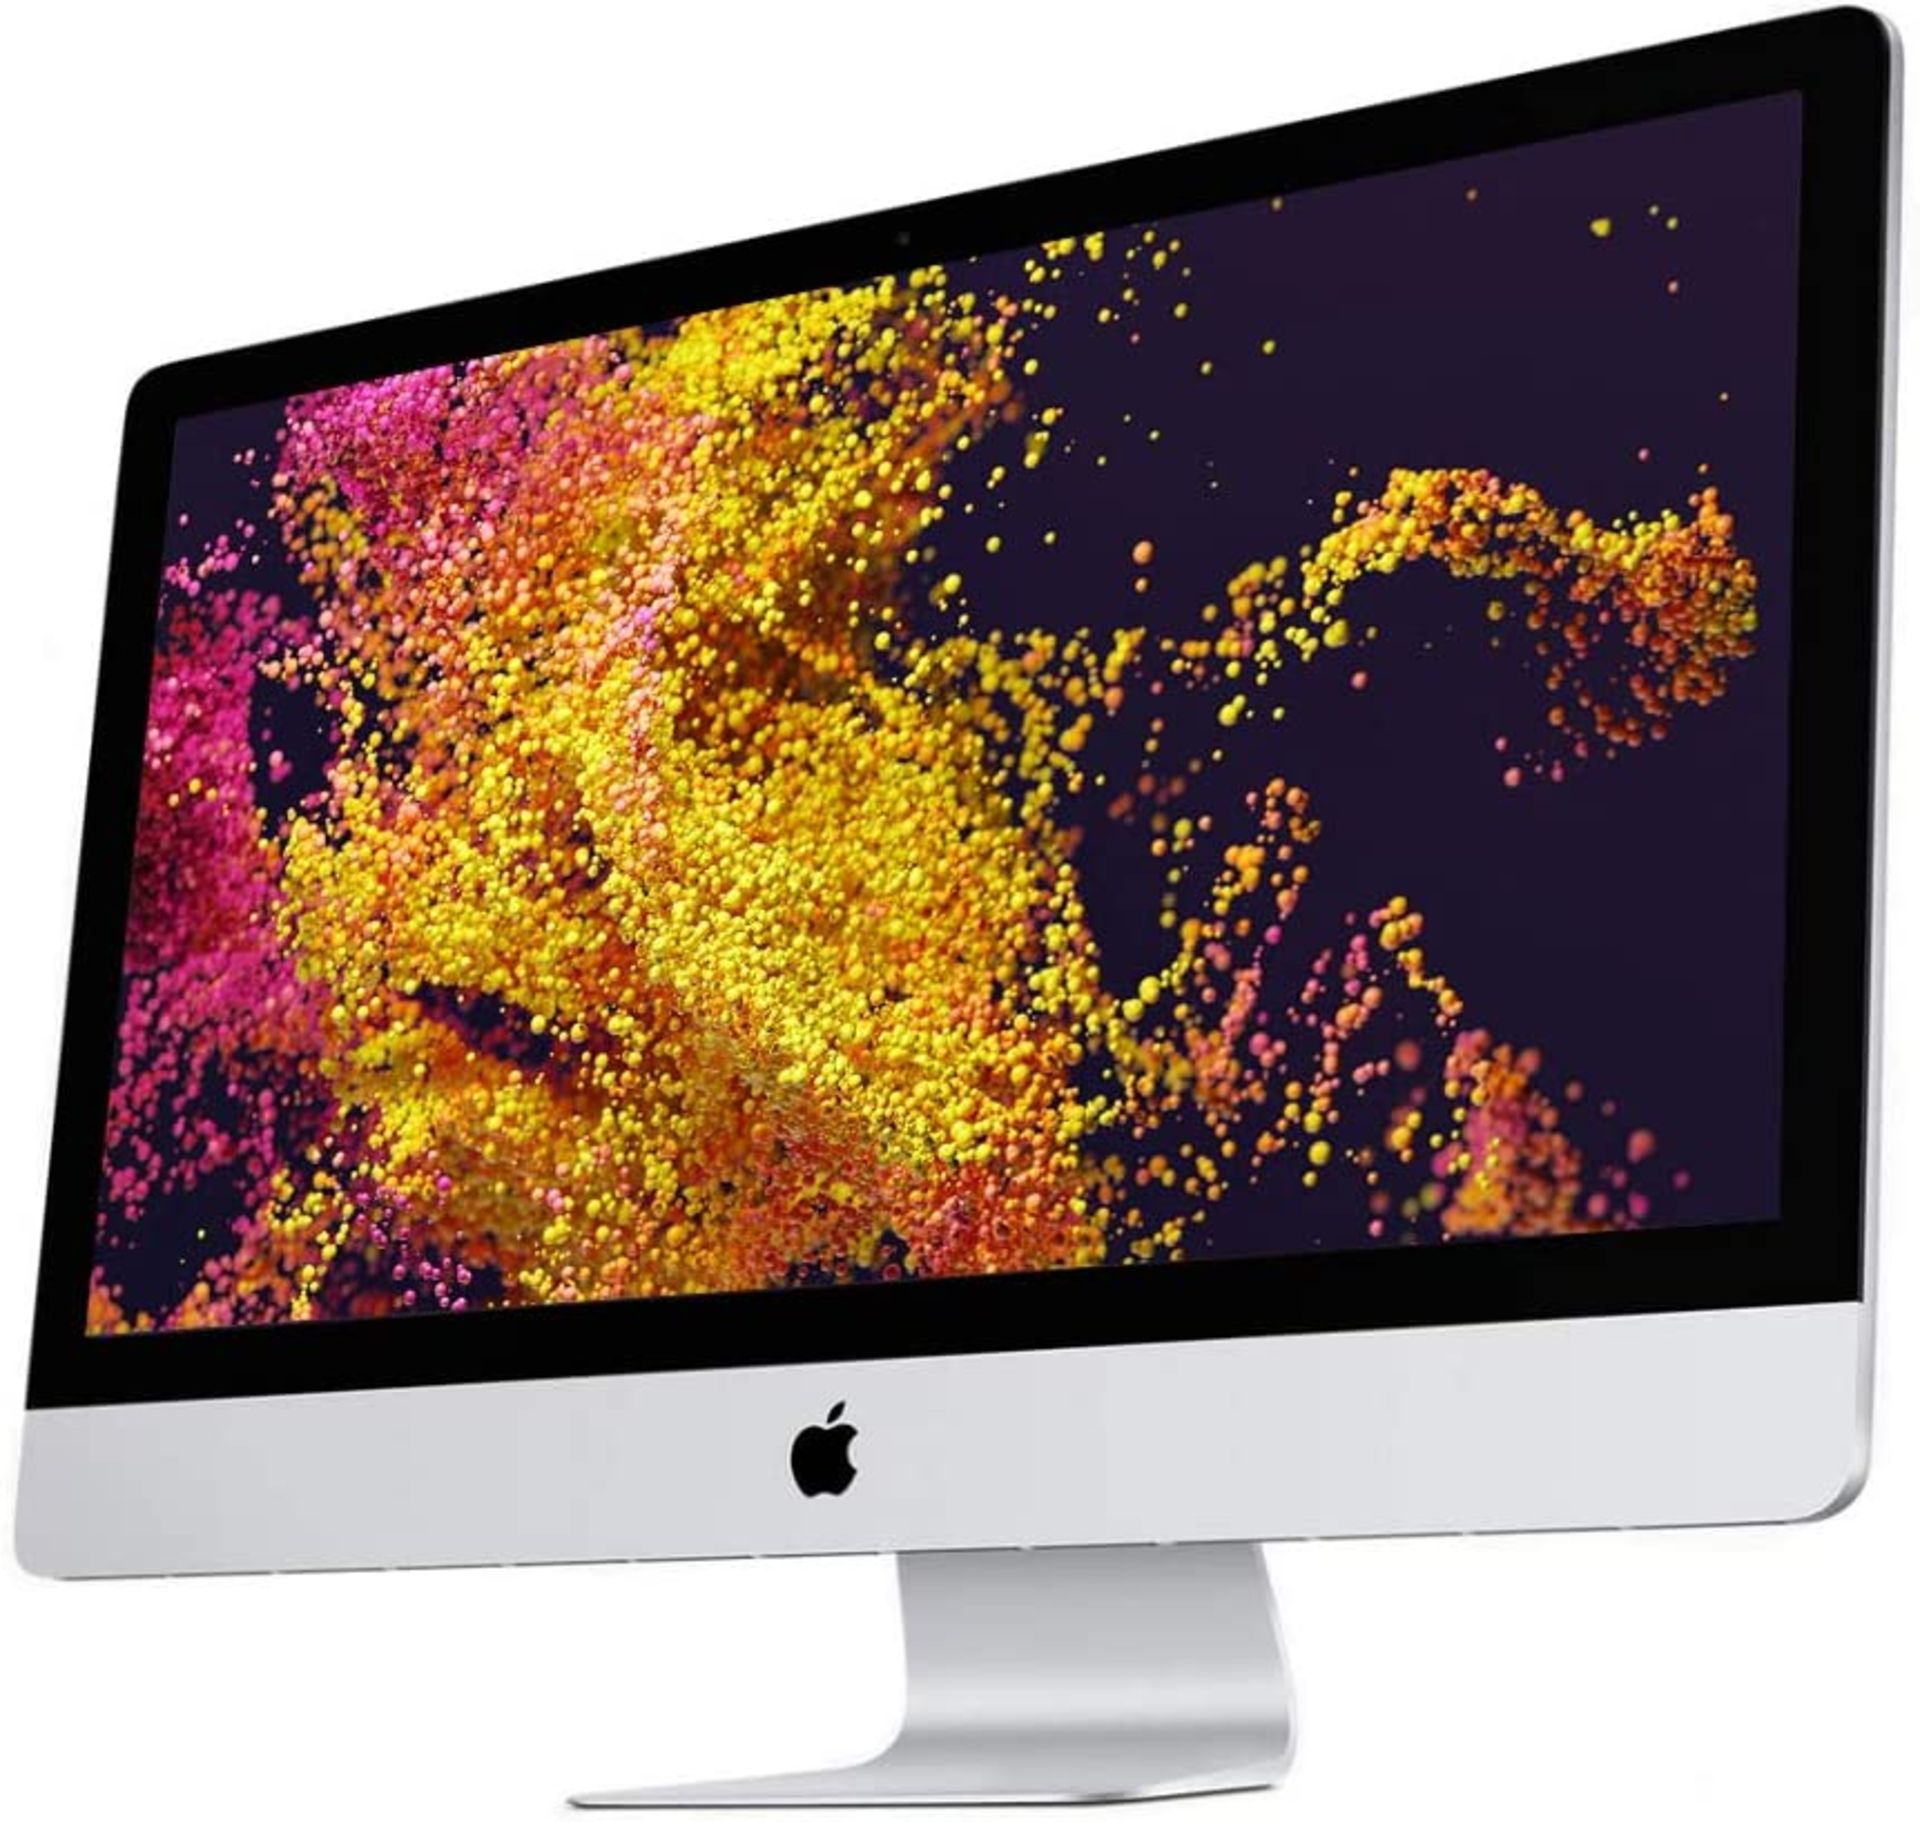 APPLE IMAC 20'' CORE 2 DUO 2GB 250GB Radeon. Complete Reset With Mac OS X, And Microsoft Office